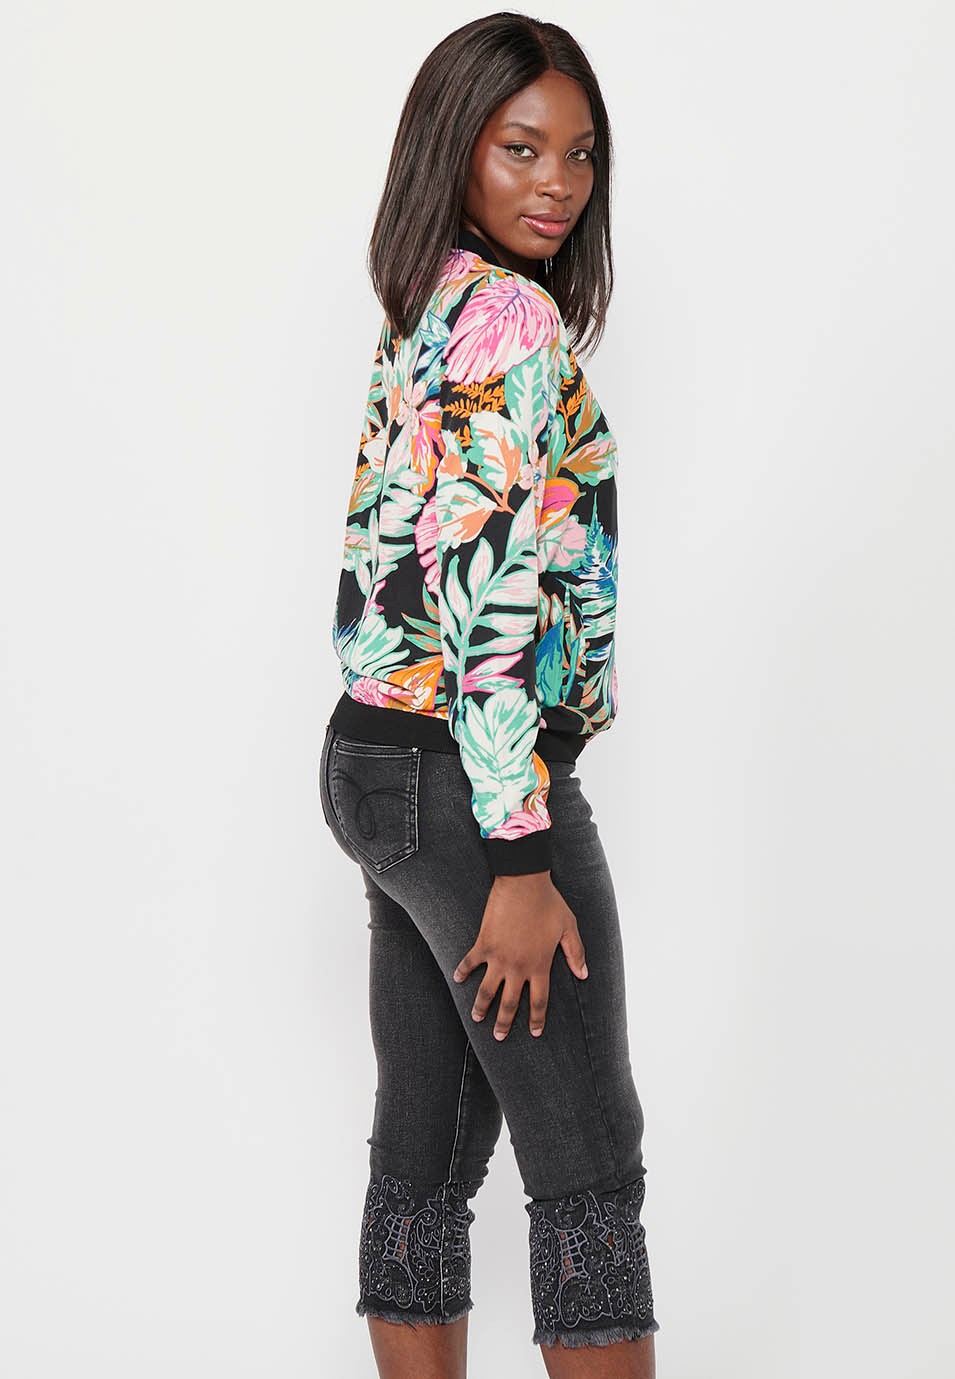 Long-sleeved sweatshirt jacket with ribbed finishes and floral print with front zipper closure. Composition 100% Polyester. Multicolor Color for Women from the Koröshi brand 8